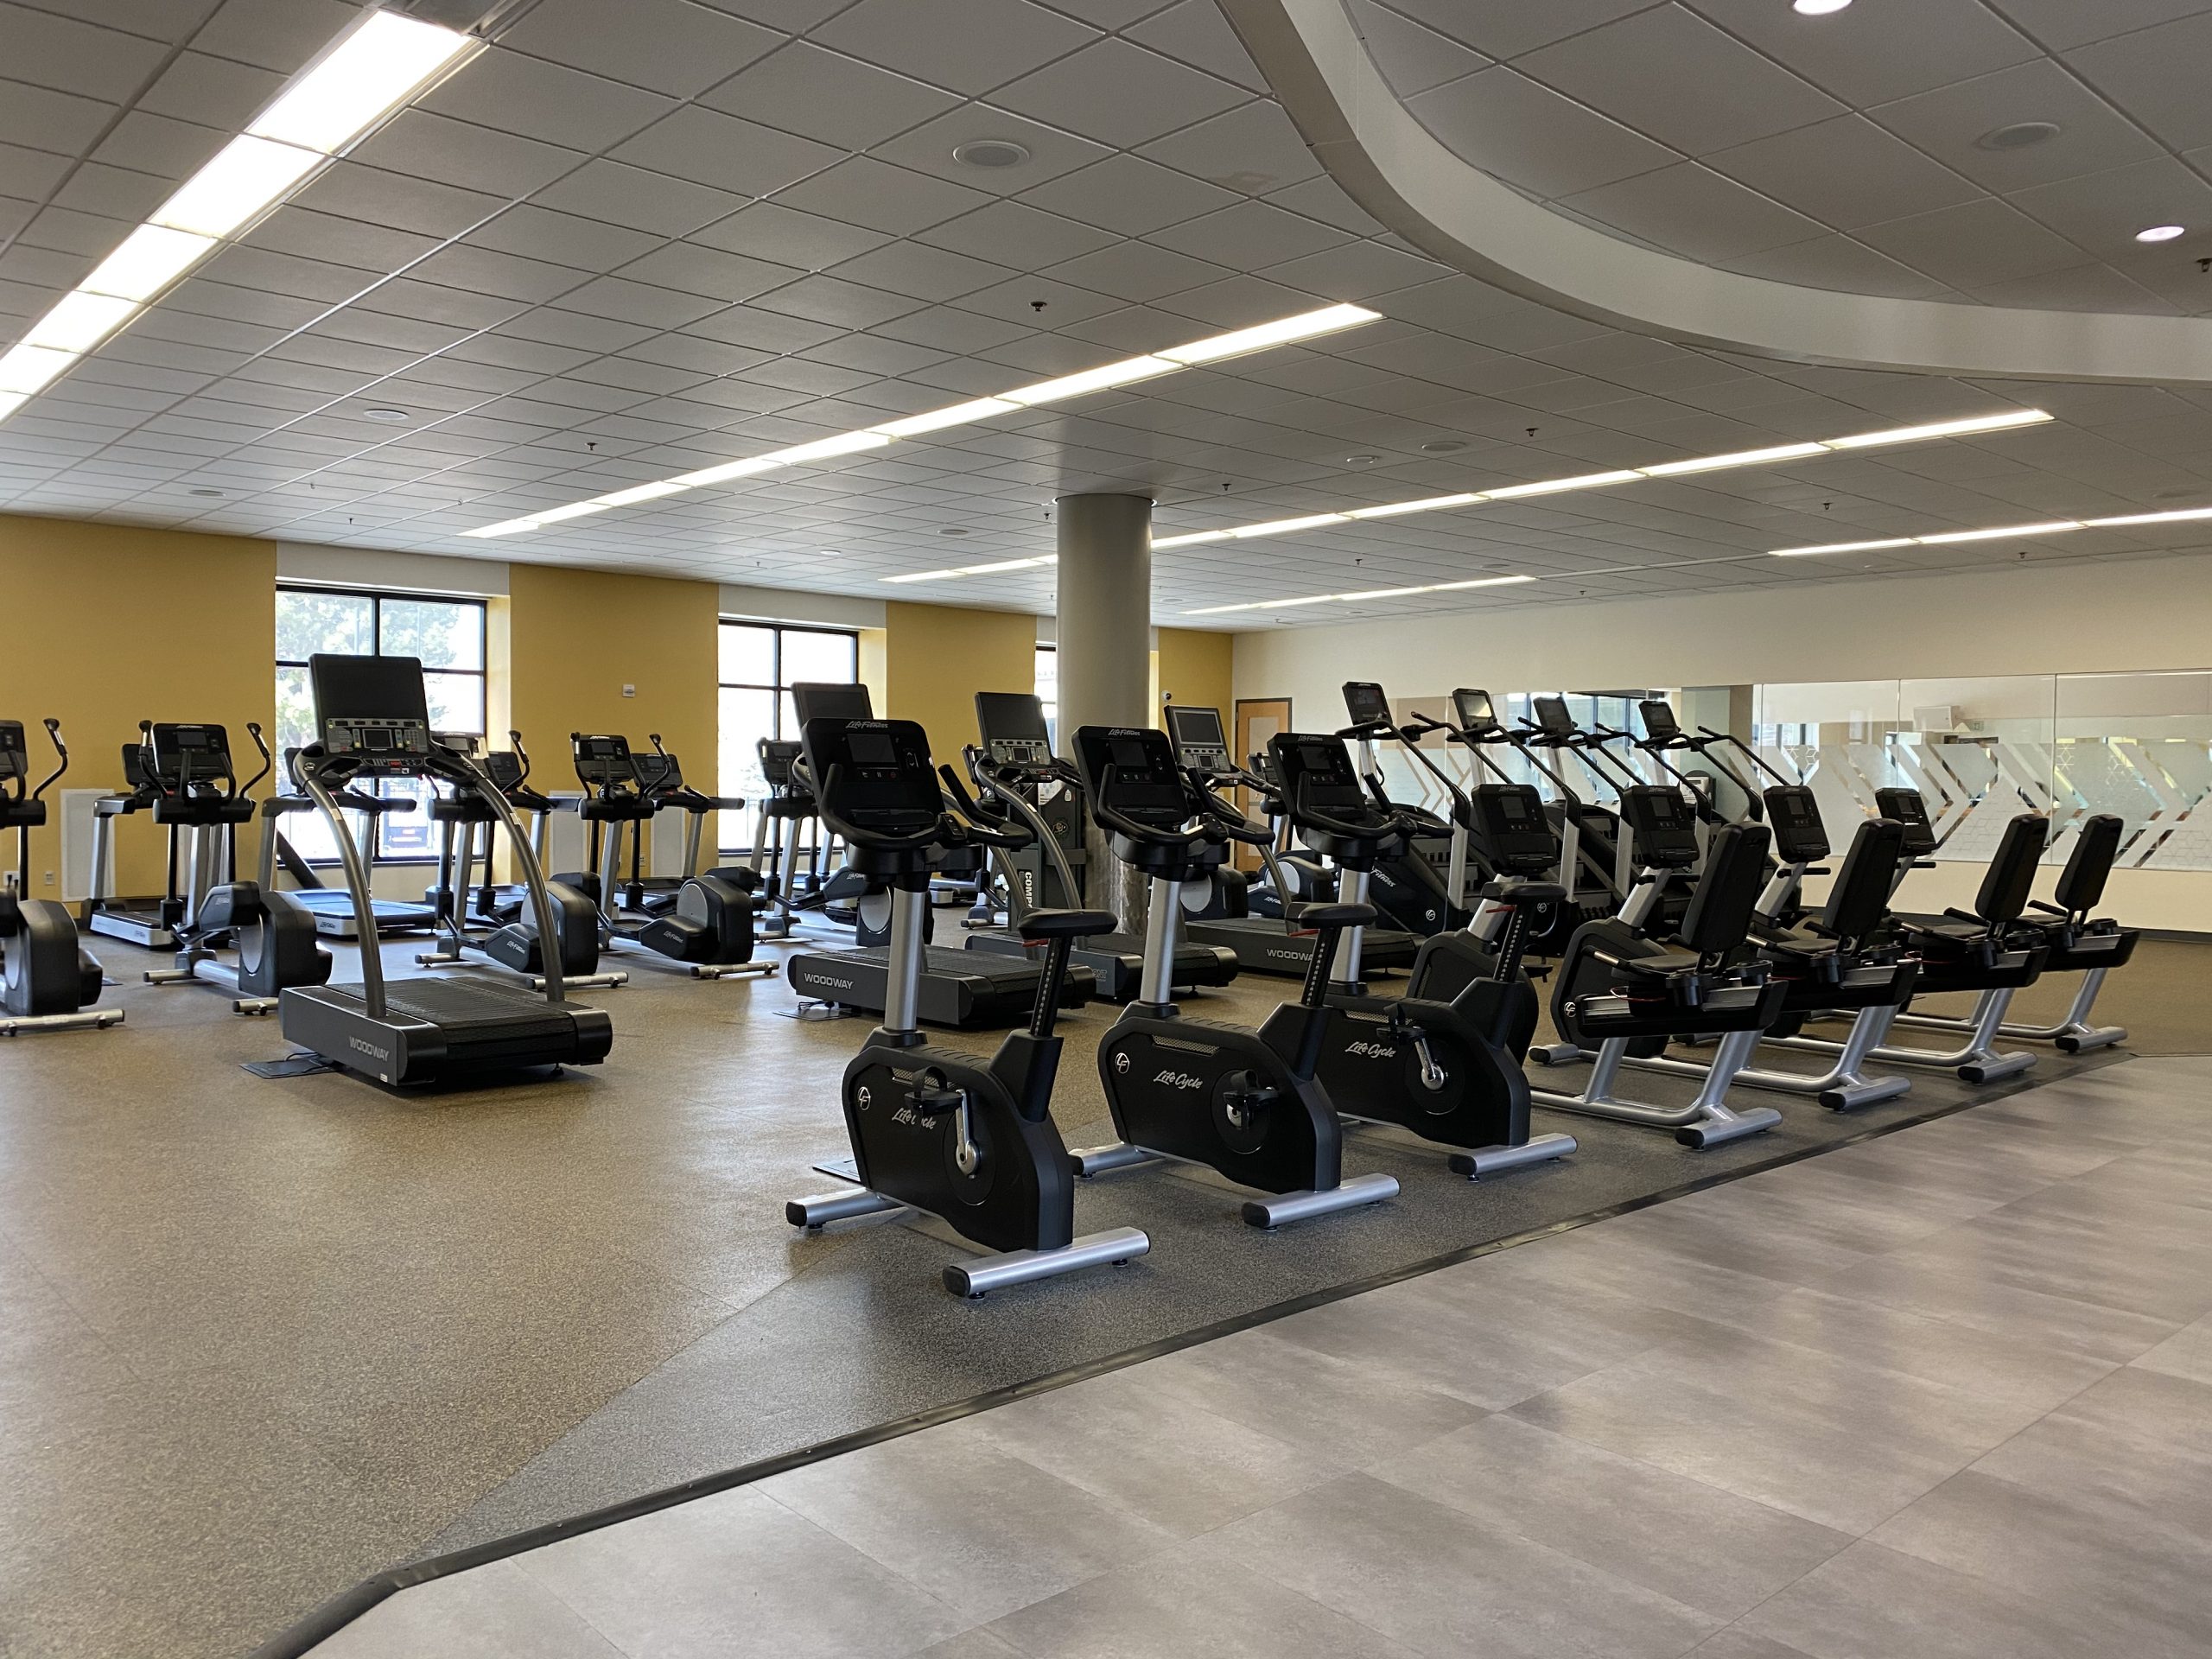 The Rec Room - Still time to get that Fitness Buff on your